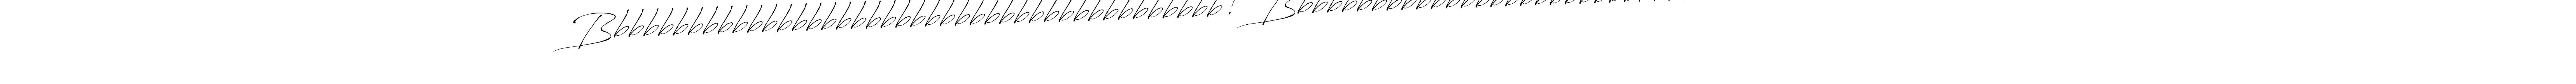 Create a beautiful signature design for name Bbbbbbbbbbbbbbbbbbbbbbbbbbbbbbbbbbbbbbbbbb! Bbbbbbbbbbbbbbbbbbbbbbbbbbbbbbbbbbbbbbbbbbbbbbbb. With this signature (Antro_Vectra) fonts, you can make a handwritten signature for free. Bbbbbbbbbbbbbbbbbbbbbbbbbbbbbbbbbbbbbbbbbb! Bbbbbbbbbbbbbbbbbbbbbbbbbbbbbbbbbbbbbbbbbbbbbbbb signature style 6 images and pictures png